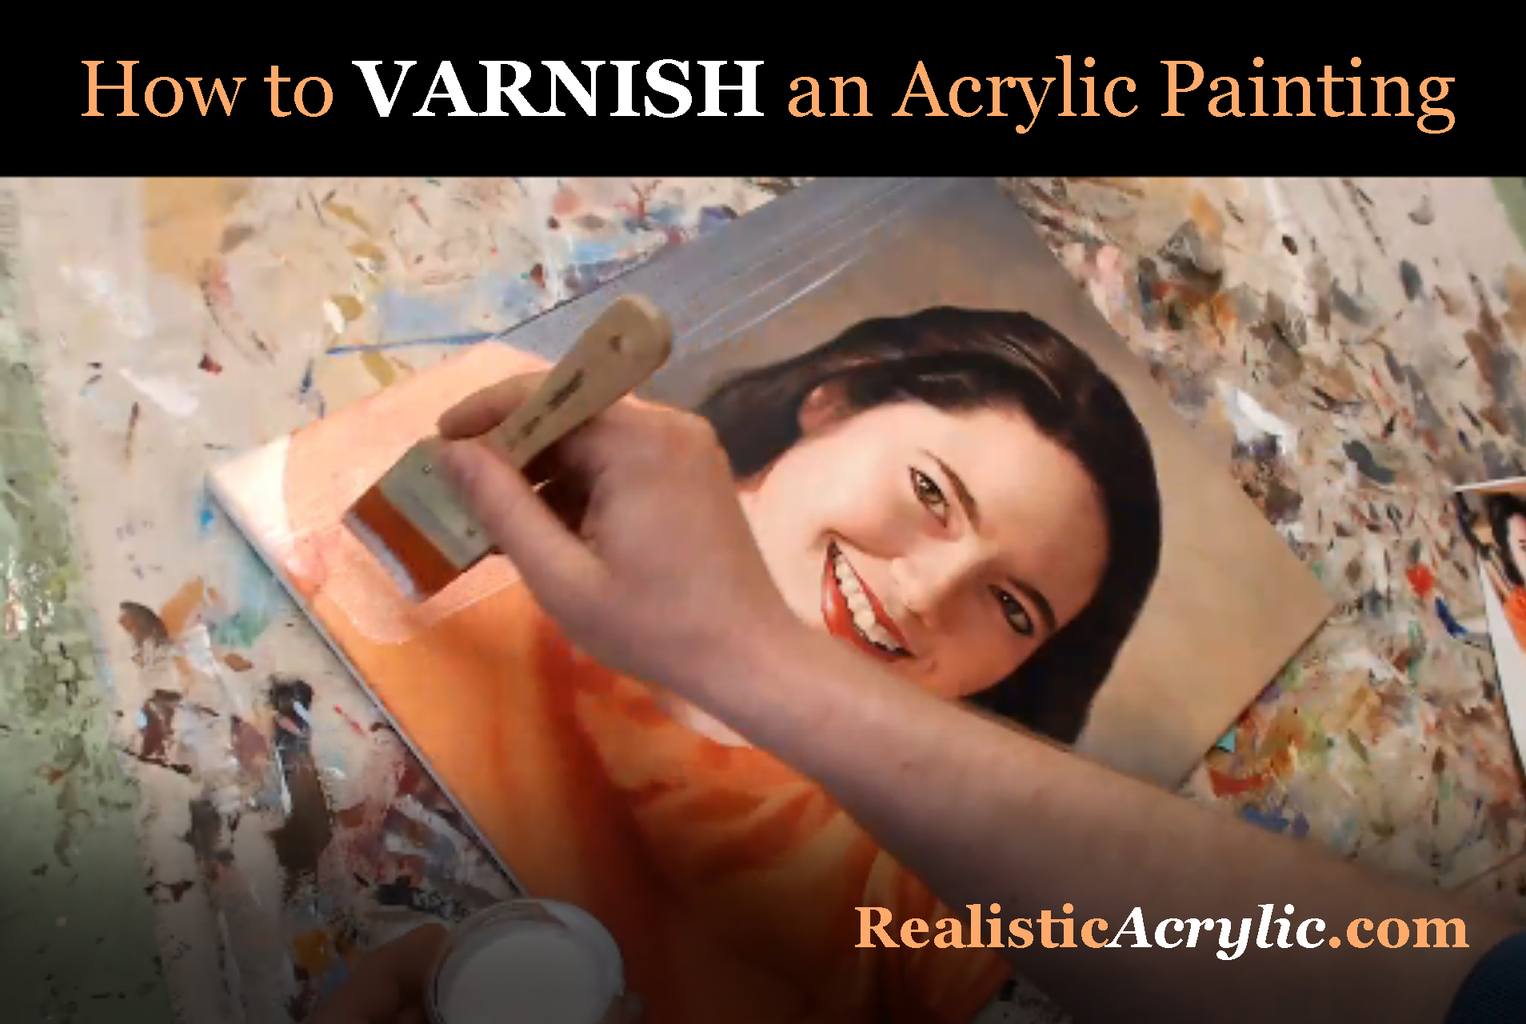 How to varnish acrylic paintings